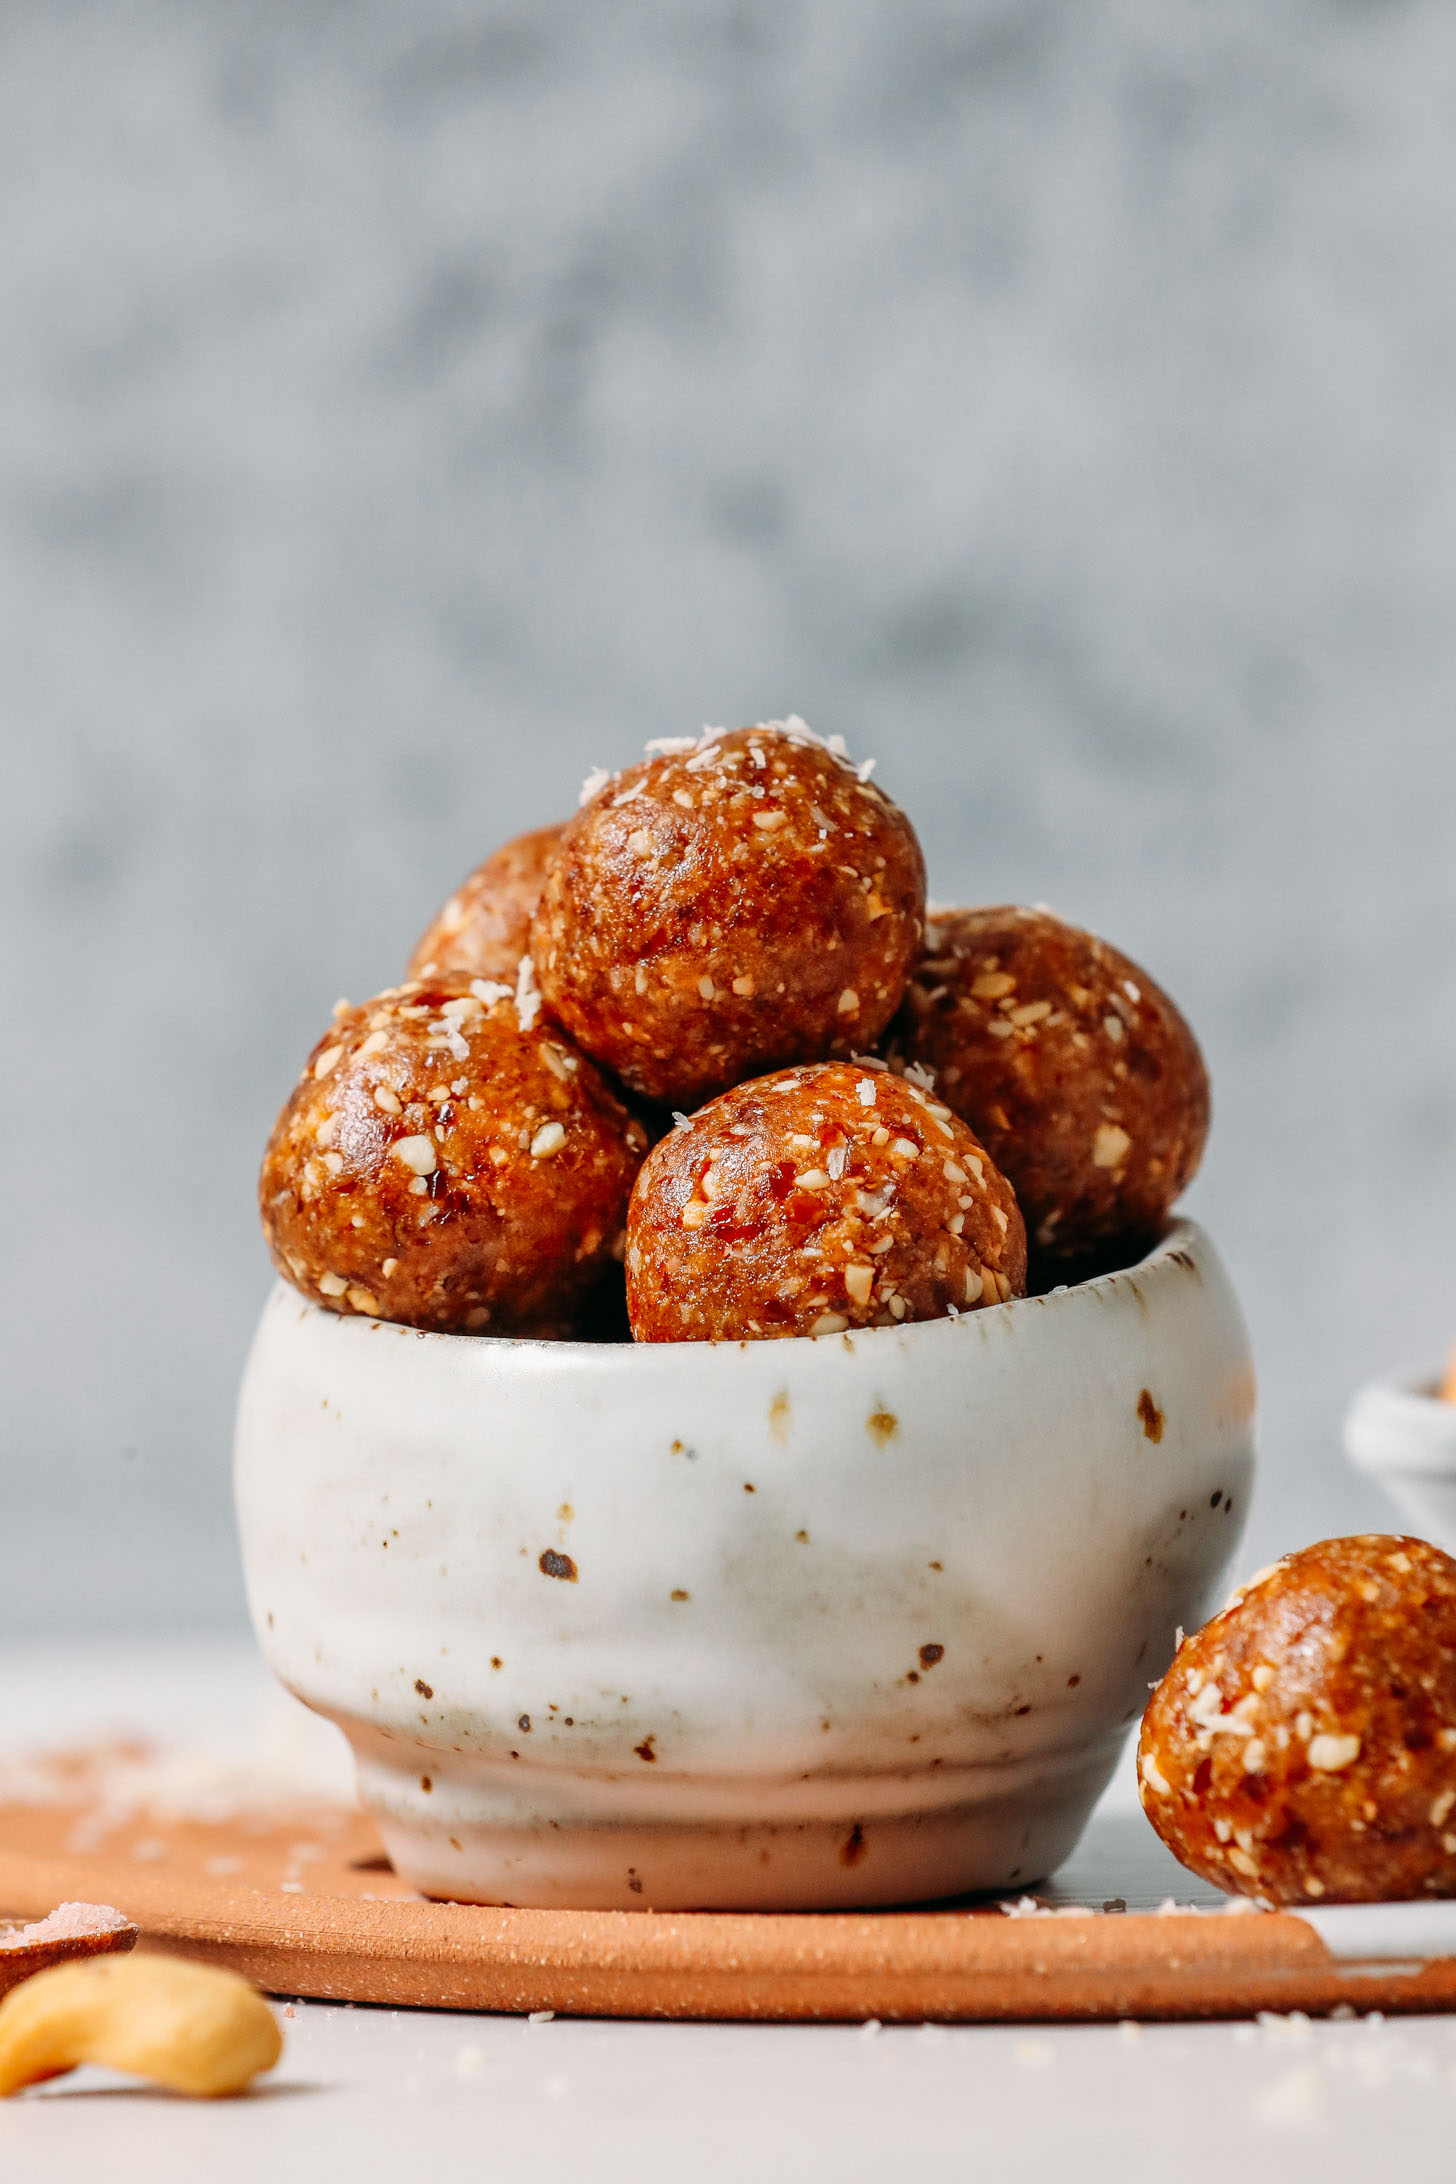 Bowl filled with Cashew Caramel Date Bites